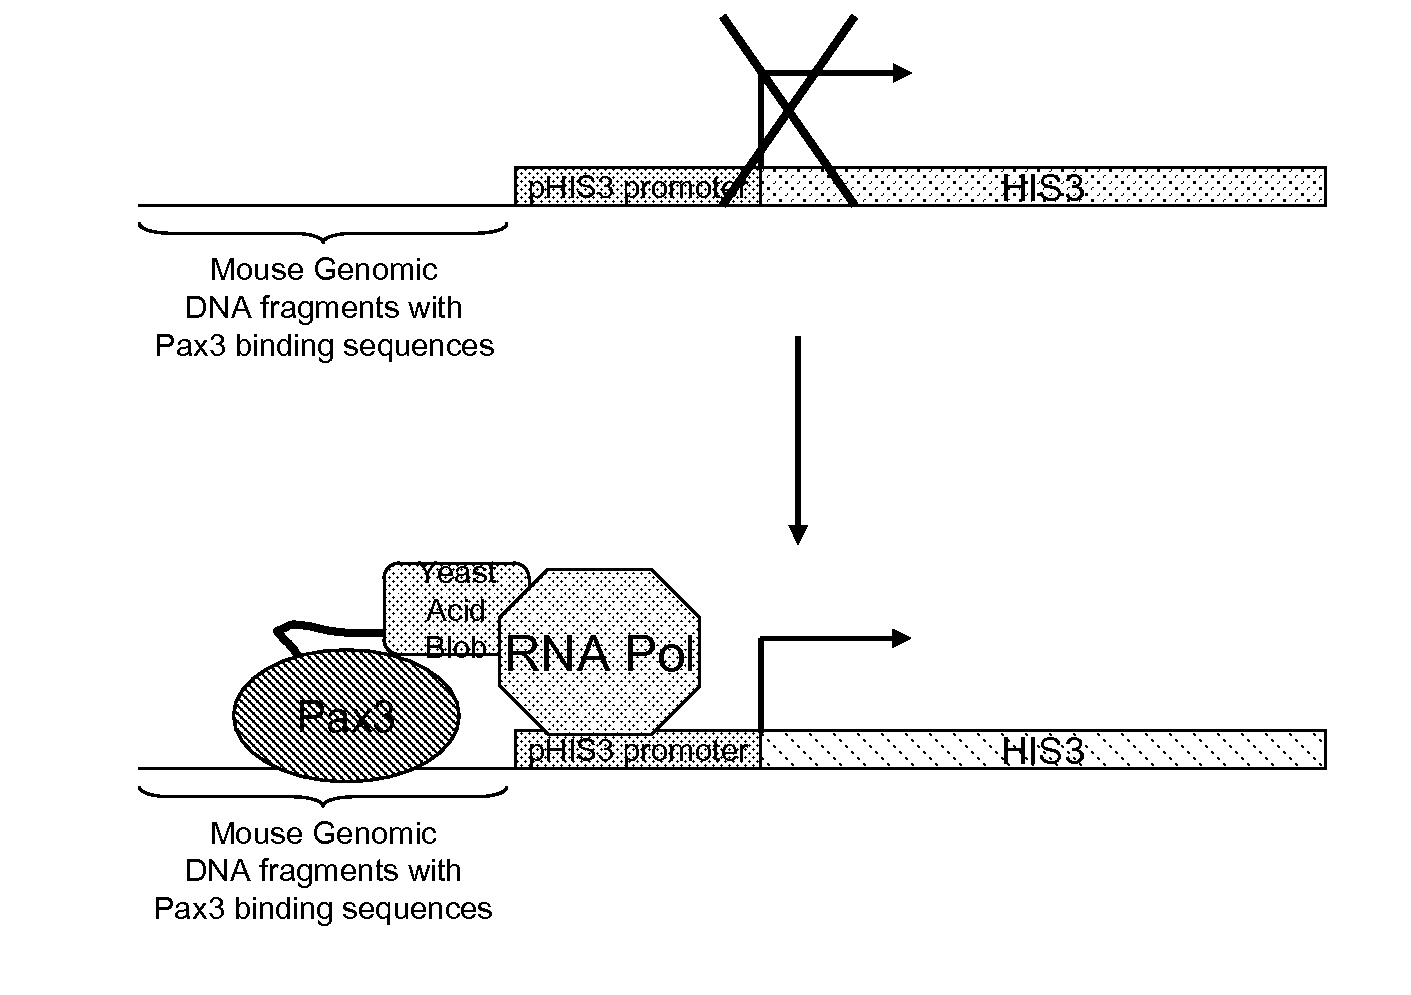 System for pulling out regulatory elements using yeast